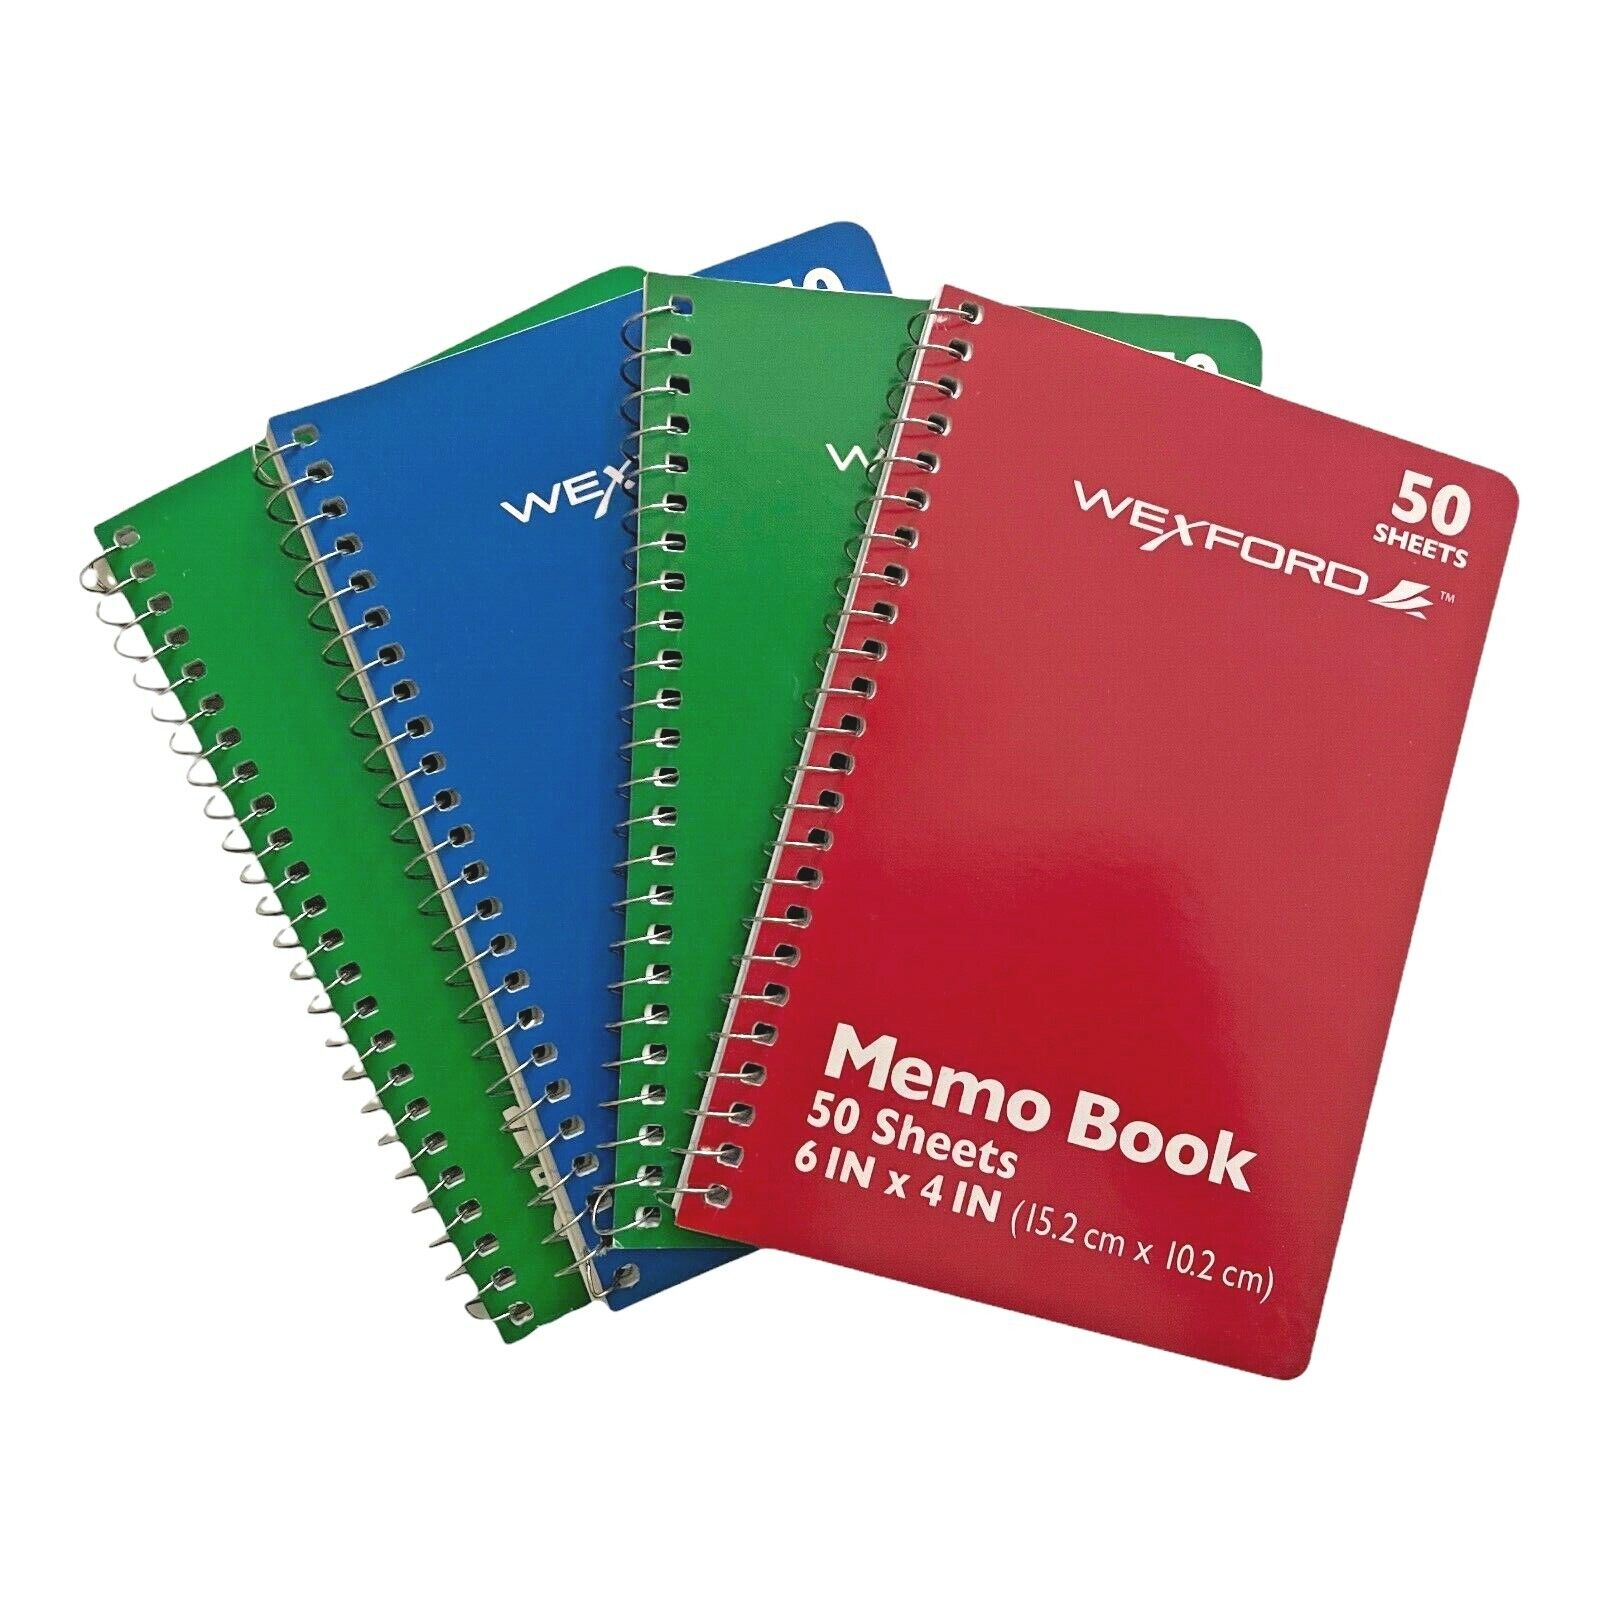 Wexford Memo Mini Spiral Notebook Lined Note Pad 6x4 Various Colors Set of 4 NEW Wexford 341283